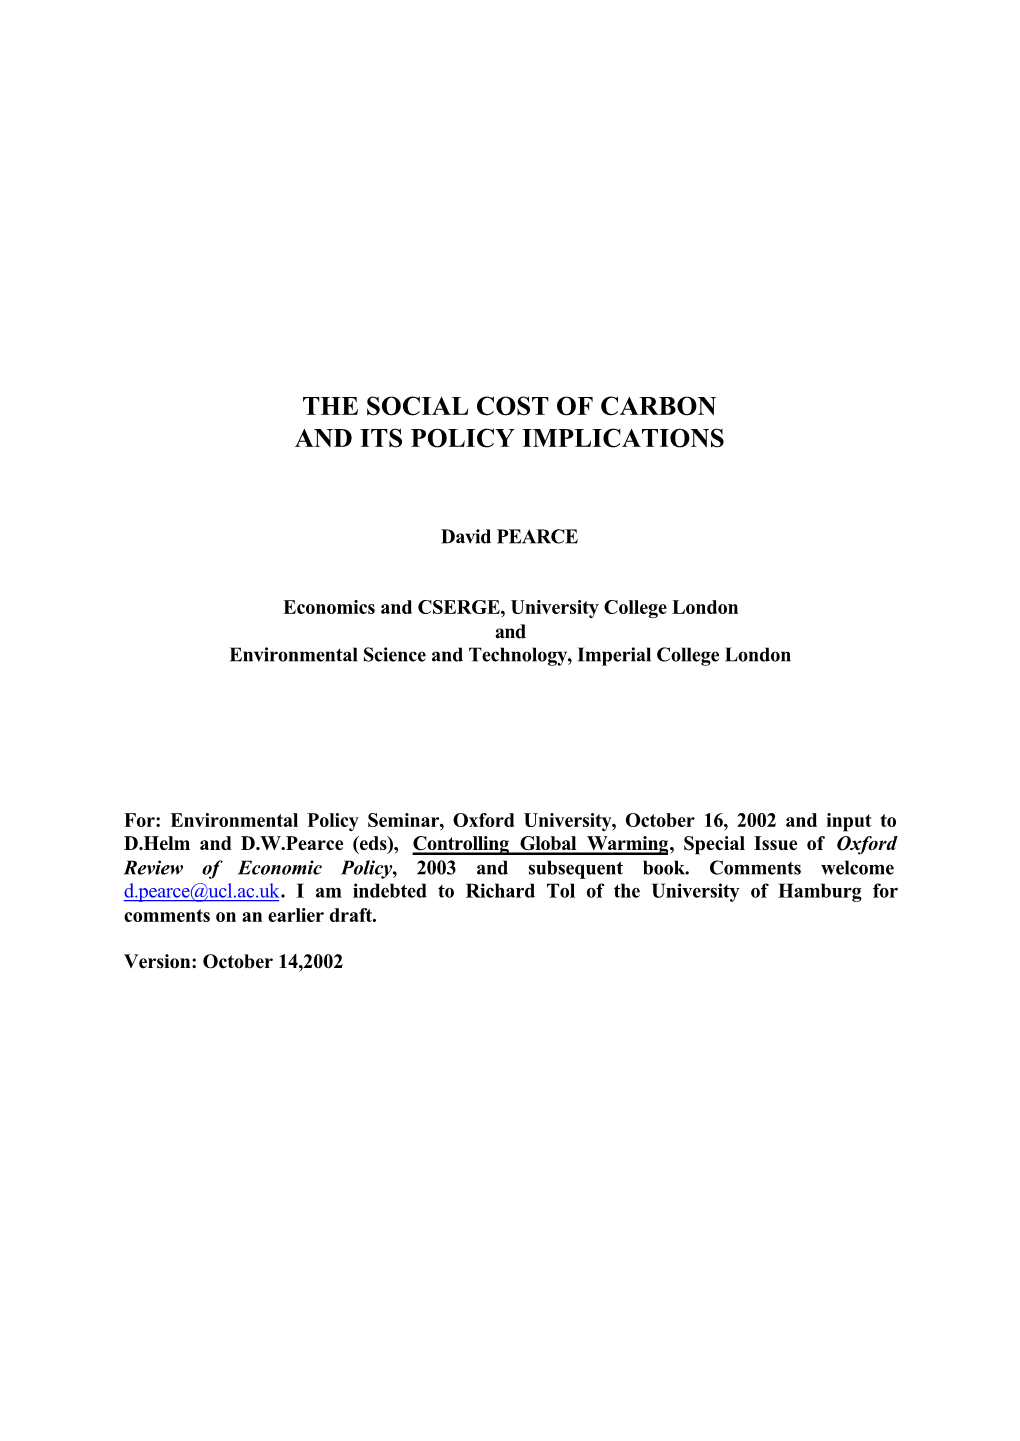 The Social Cost of Carbon and Its Policy Implications